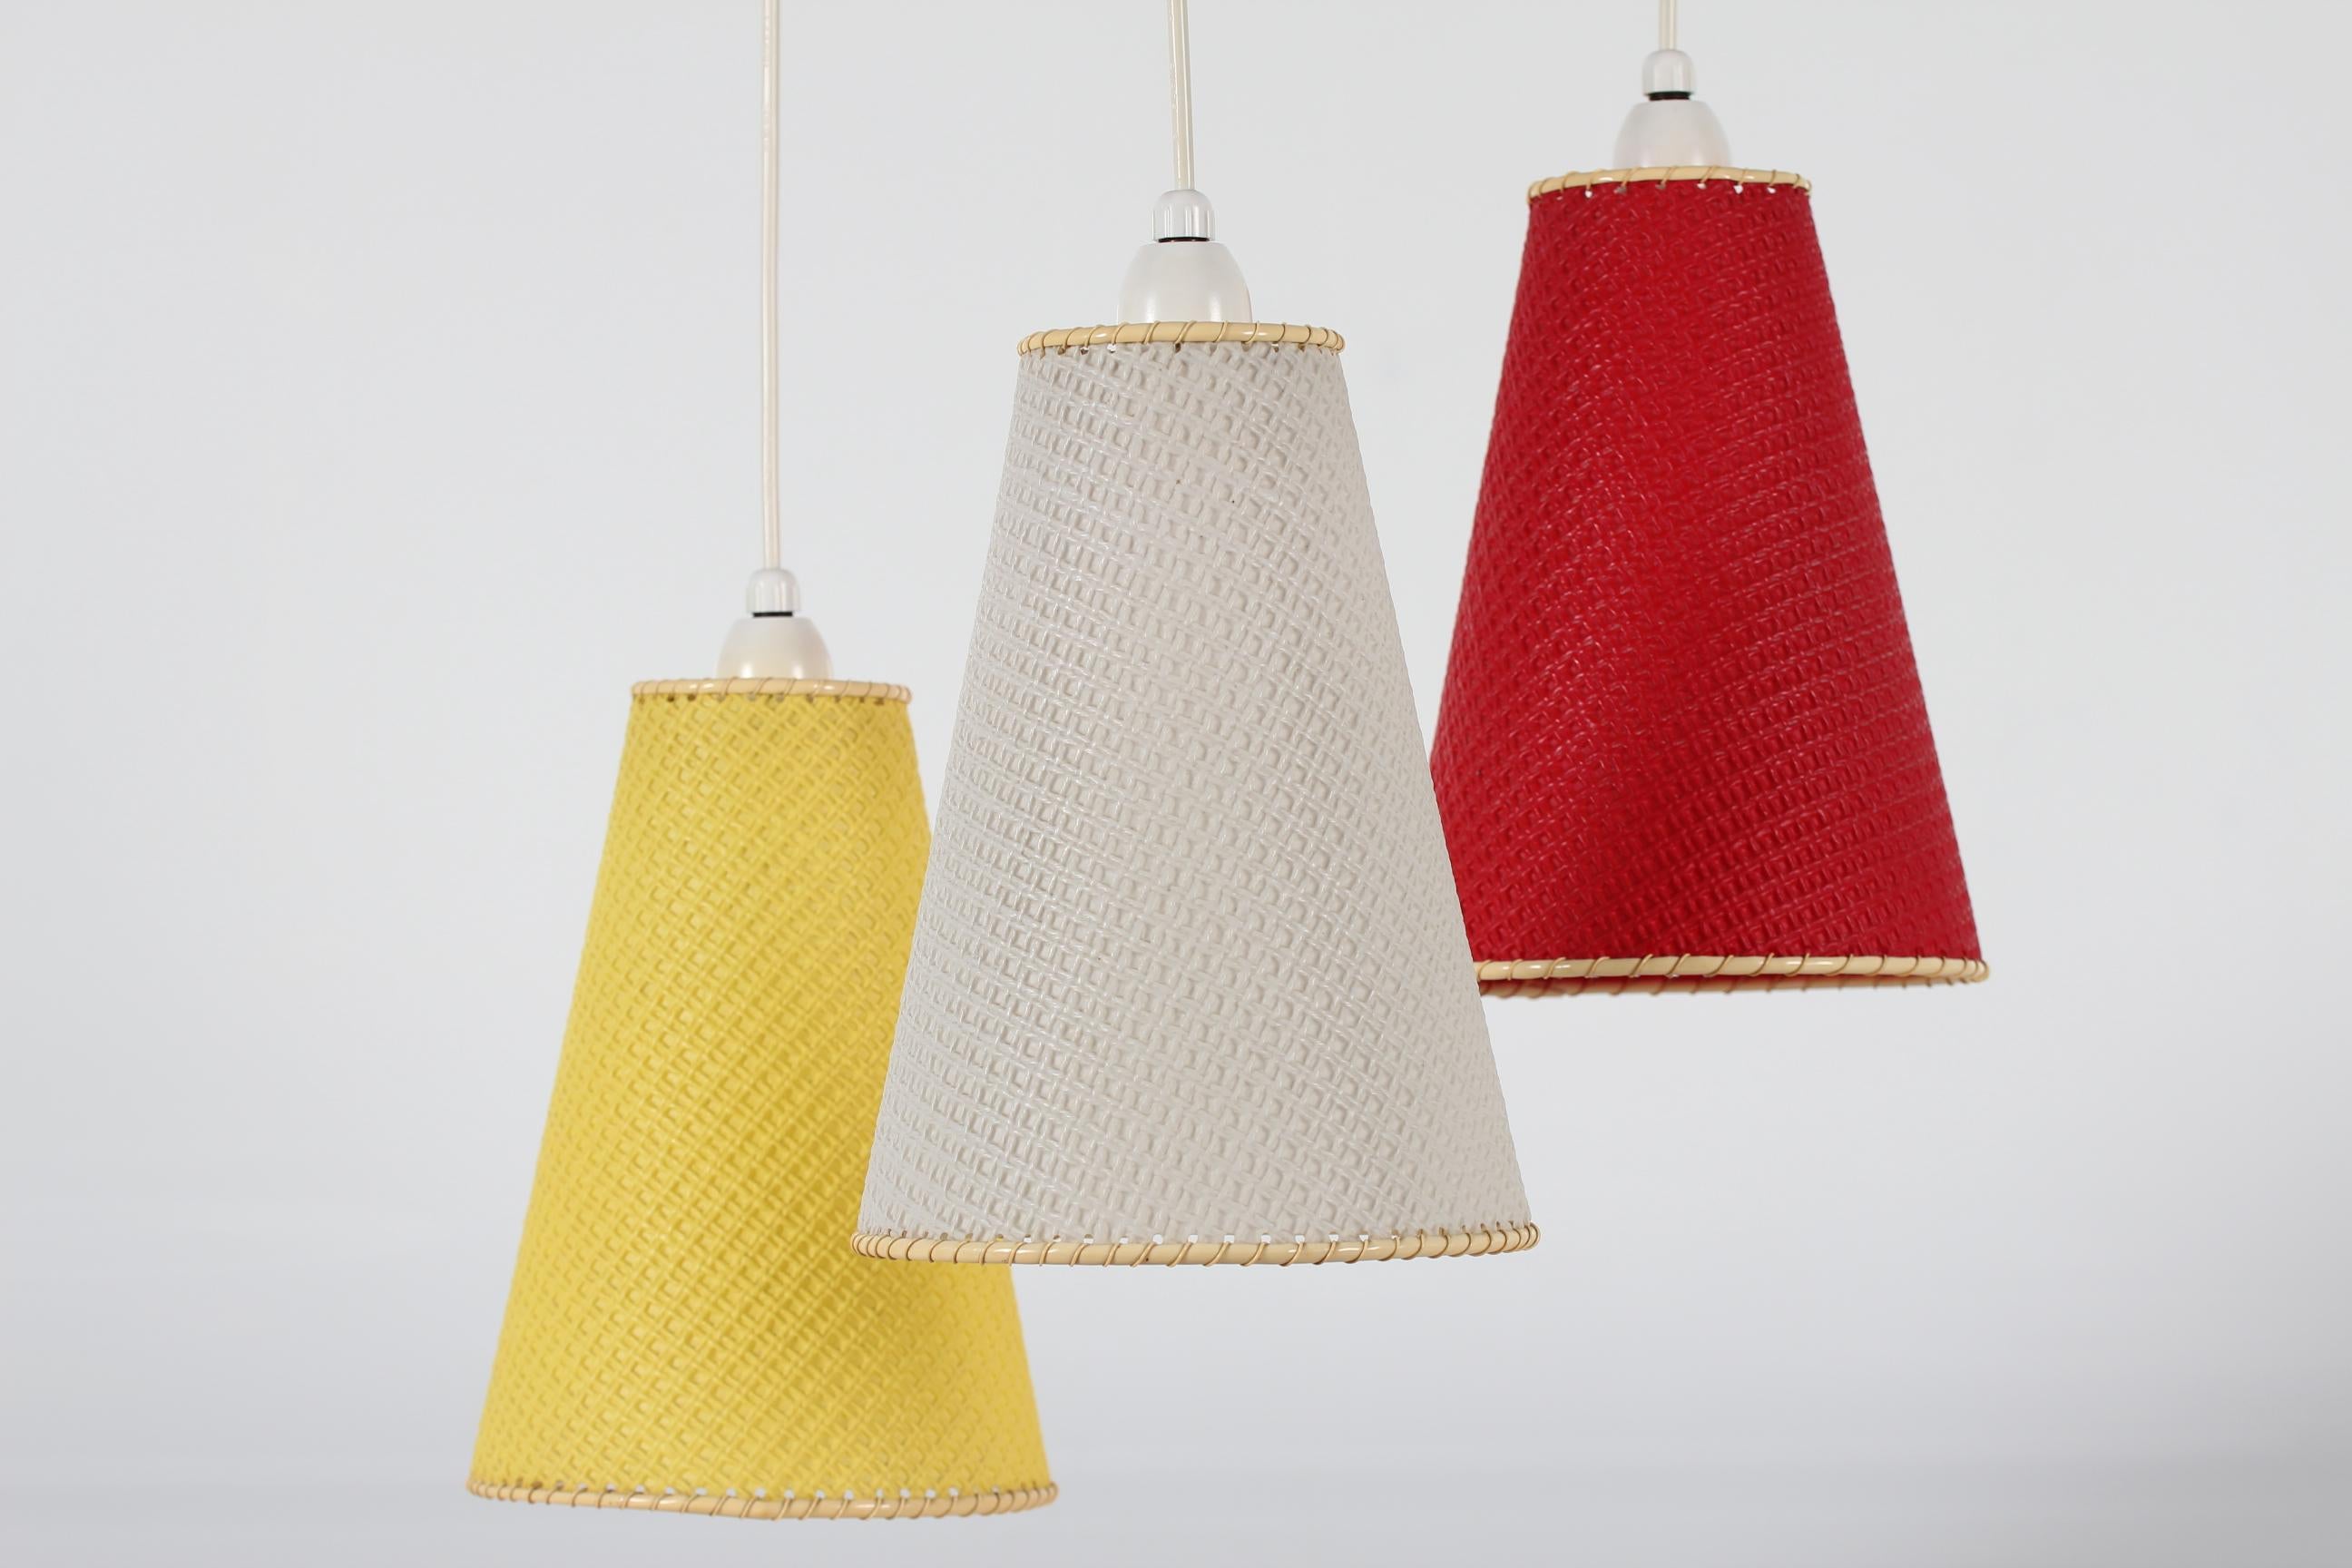 Cozy retro tri-color pendant light with three shades from the 1960s. The shades are mounted on a frame of teak, from which they hang. The plastic shades are white, yellow and red.

Measures: Total height 100 cm
Height lampshades 24 cm
Diameter